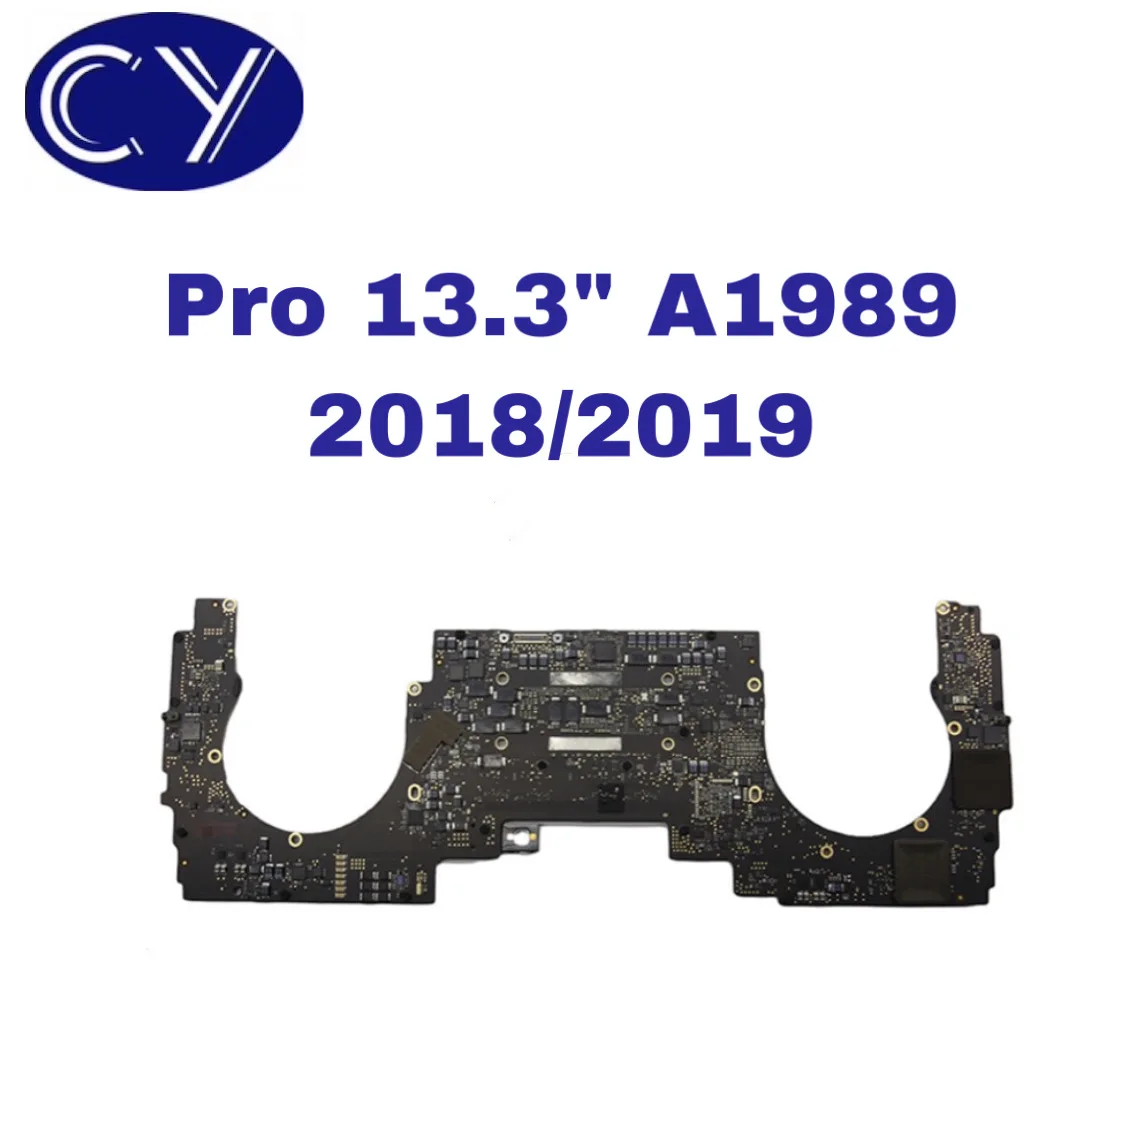 

Full Tested A1989 Motherboard for 820-00850-A for MacBook Pro Retina 13" A1989 Logic Board 2018 2019 Year MC 3214 MC 3358